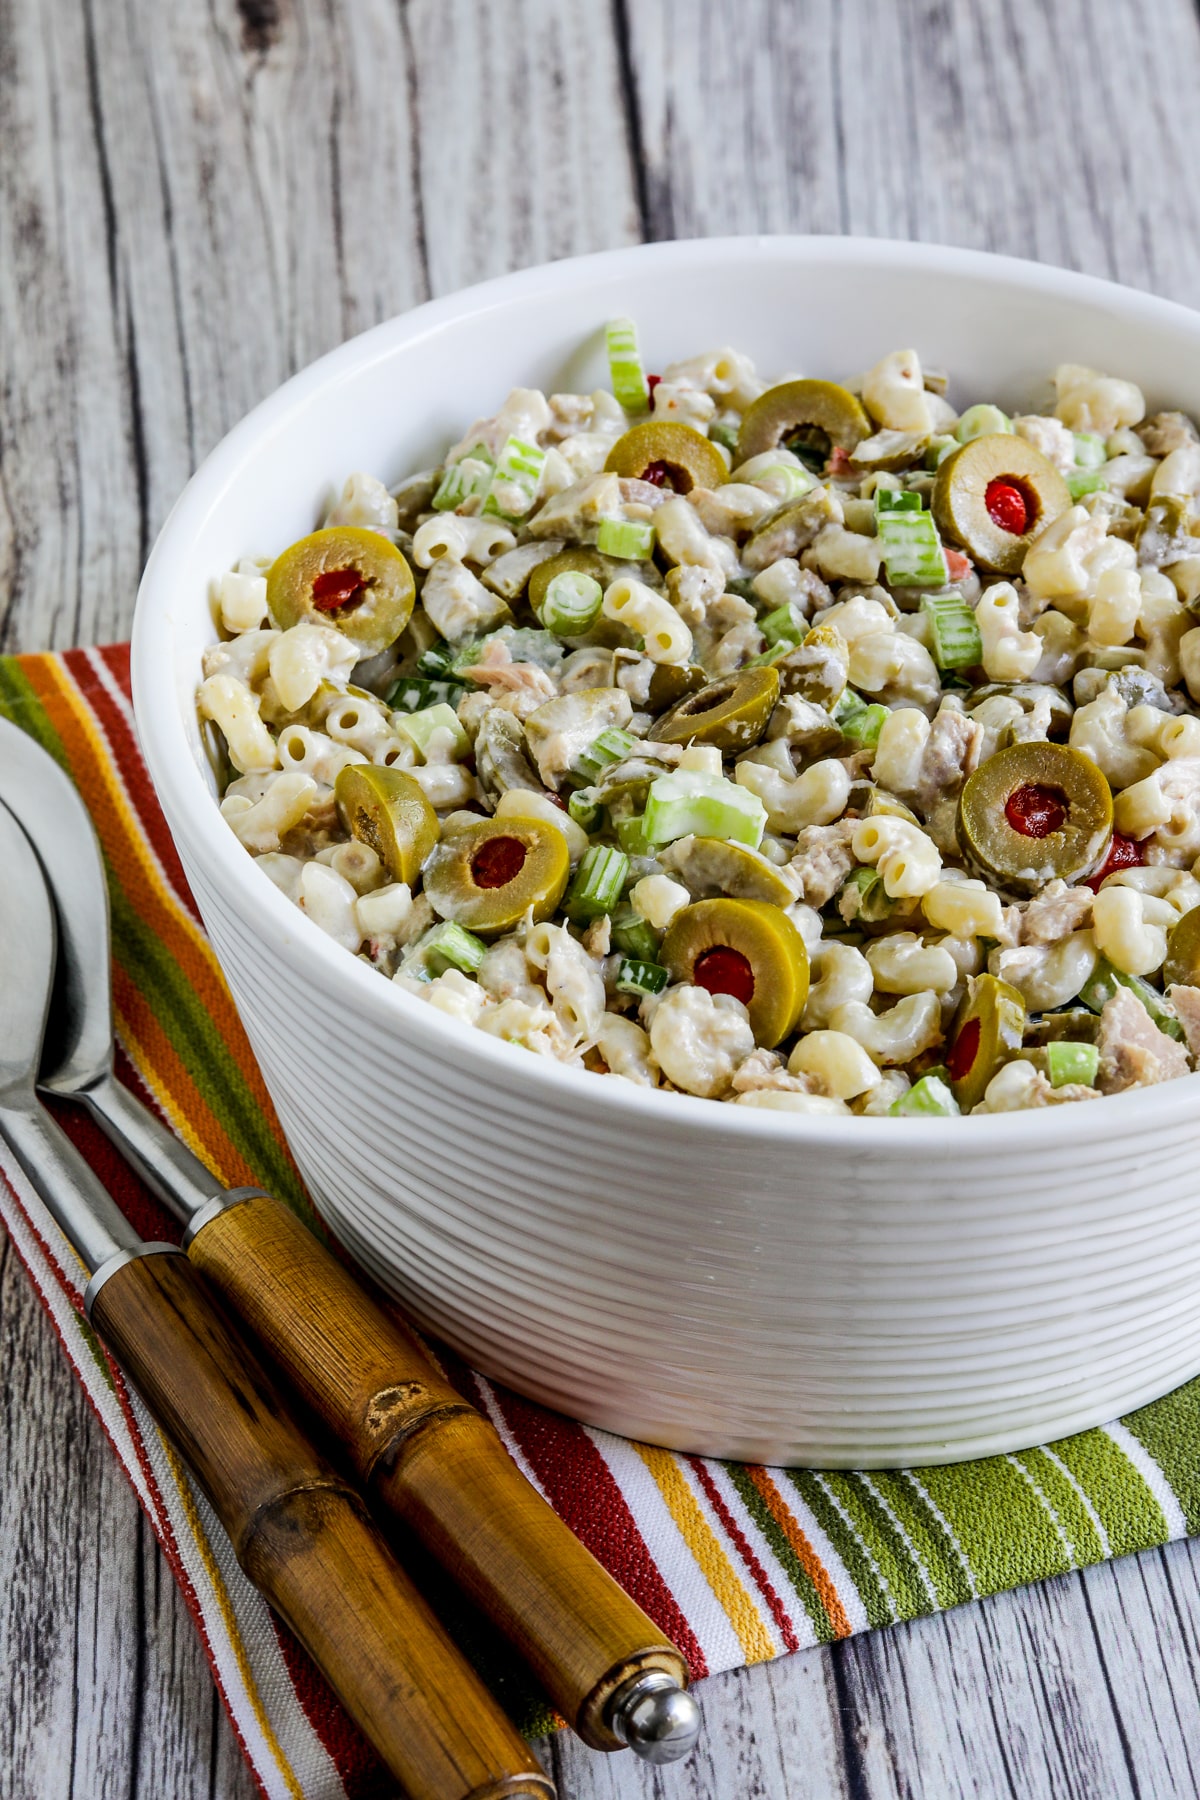 Tuna macaroni salad with green olives set out in a serving bowl with forks.